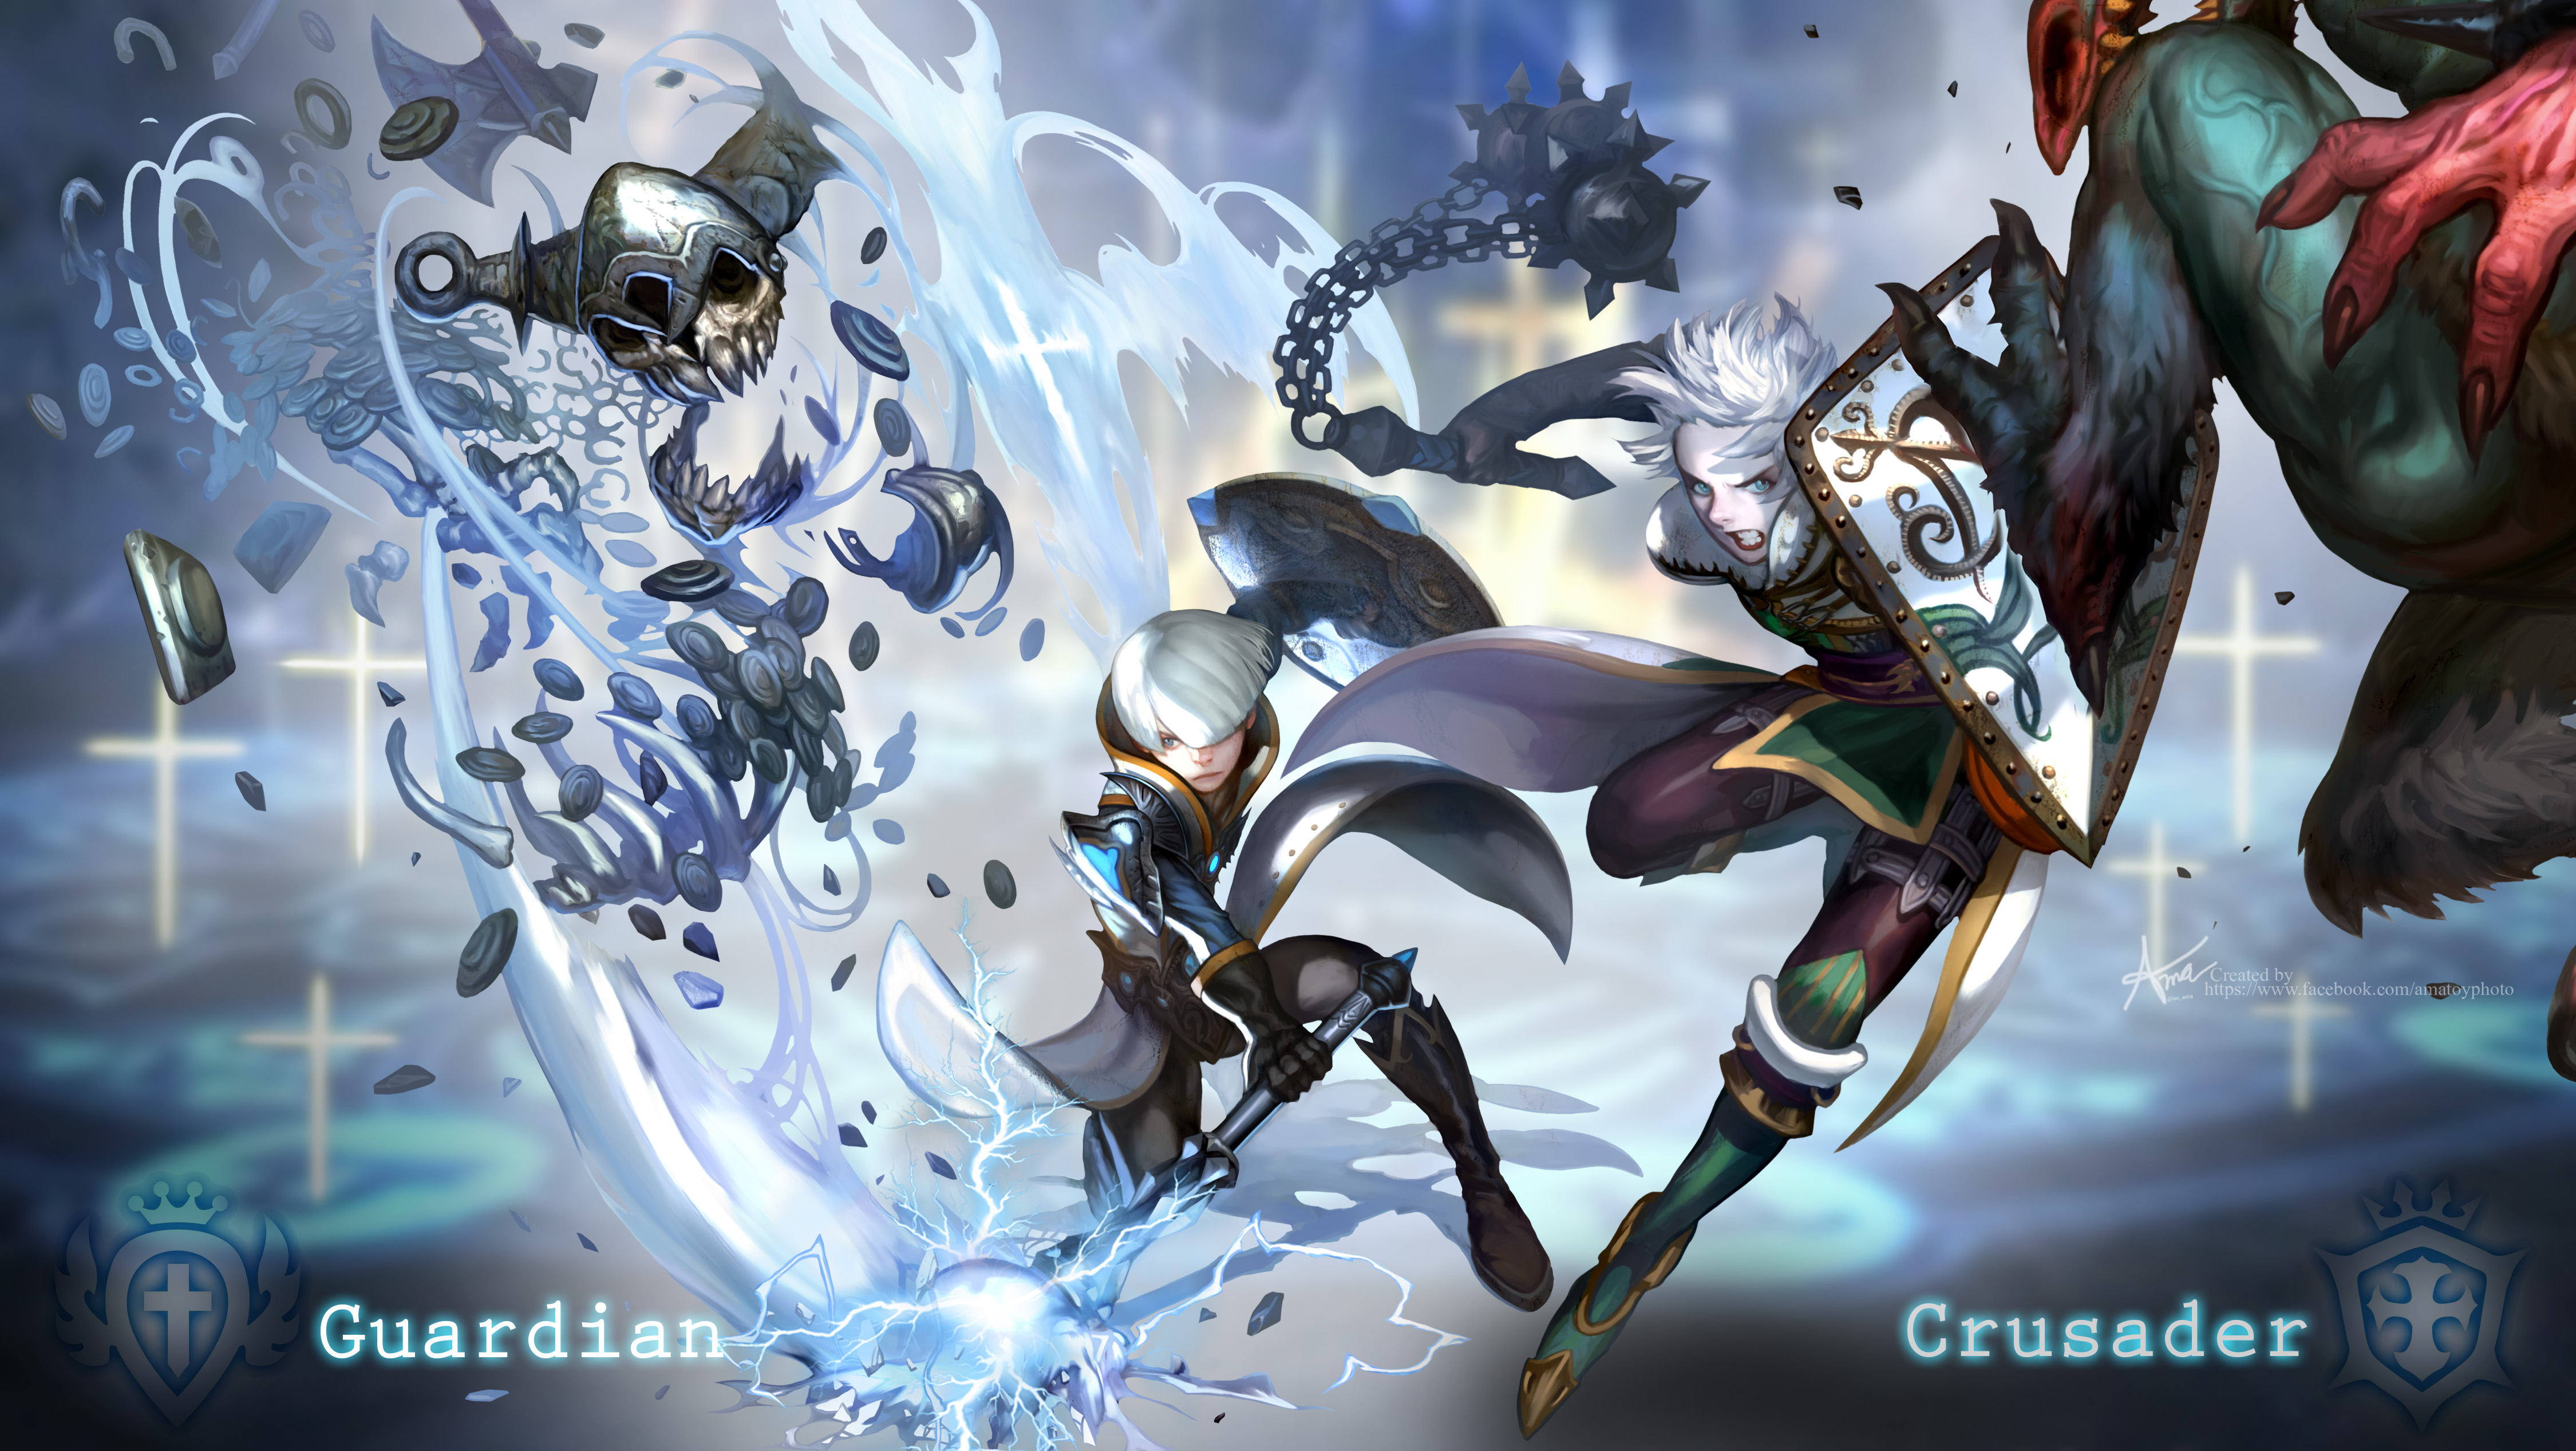 Wallpaper Dragonnest Guardian Crusader By Ama Toyphoto On